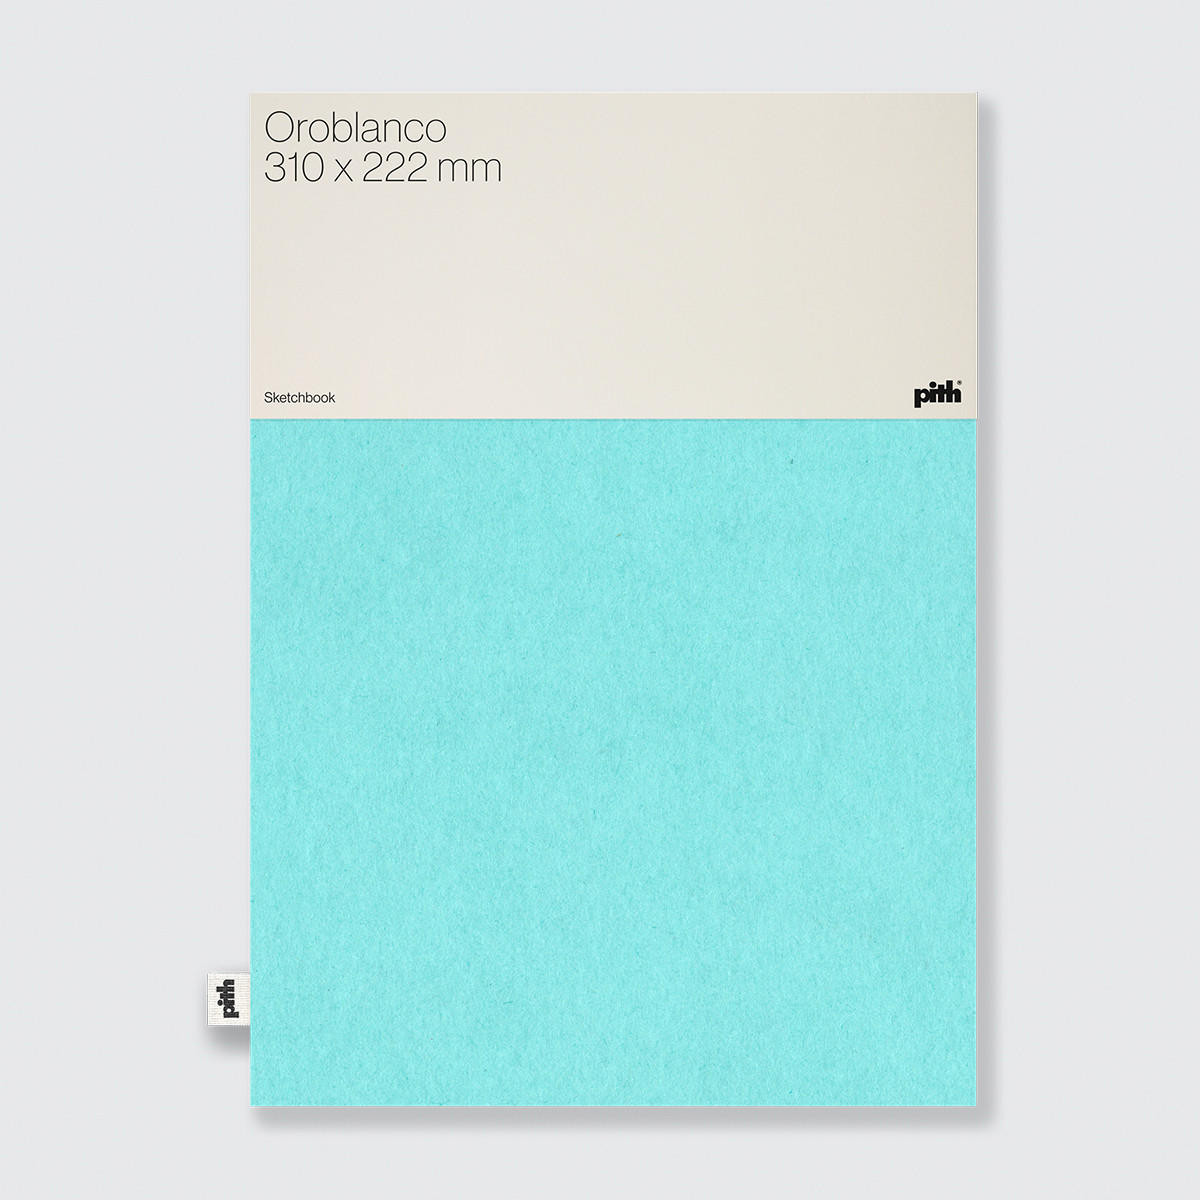 Pith Oroblanco Sketchbook 200gsm 76 Pages 310 X 222mm - Azure